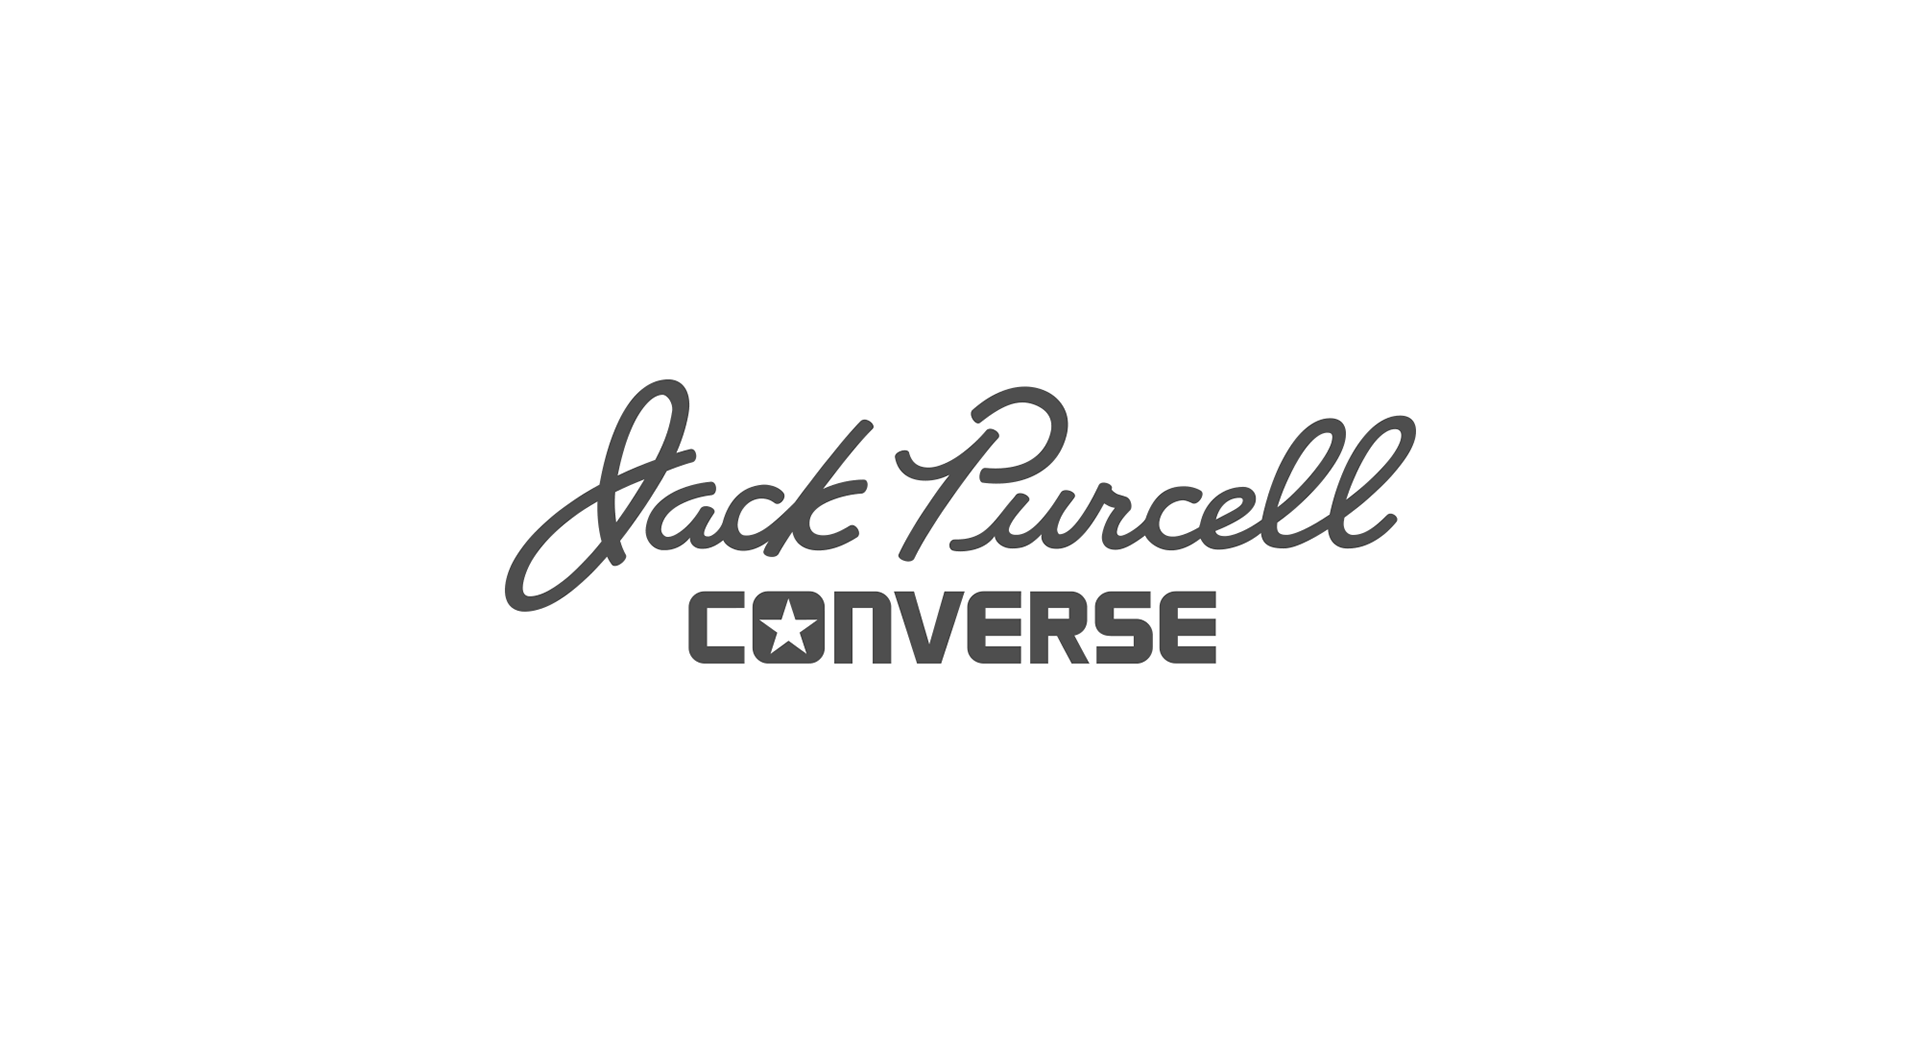 logo converse jack purcell